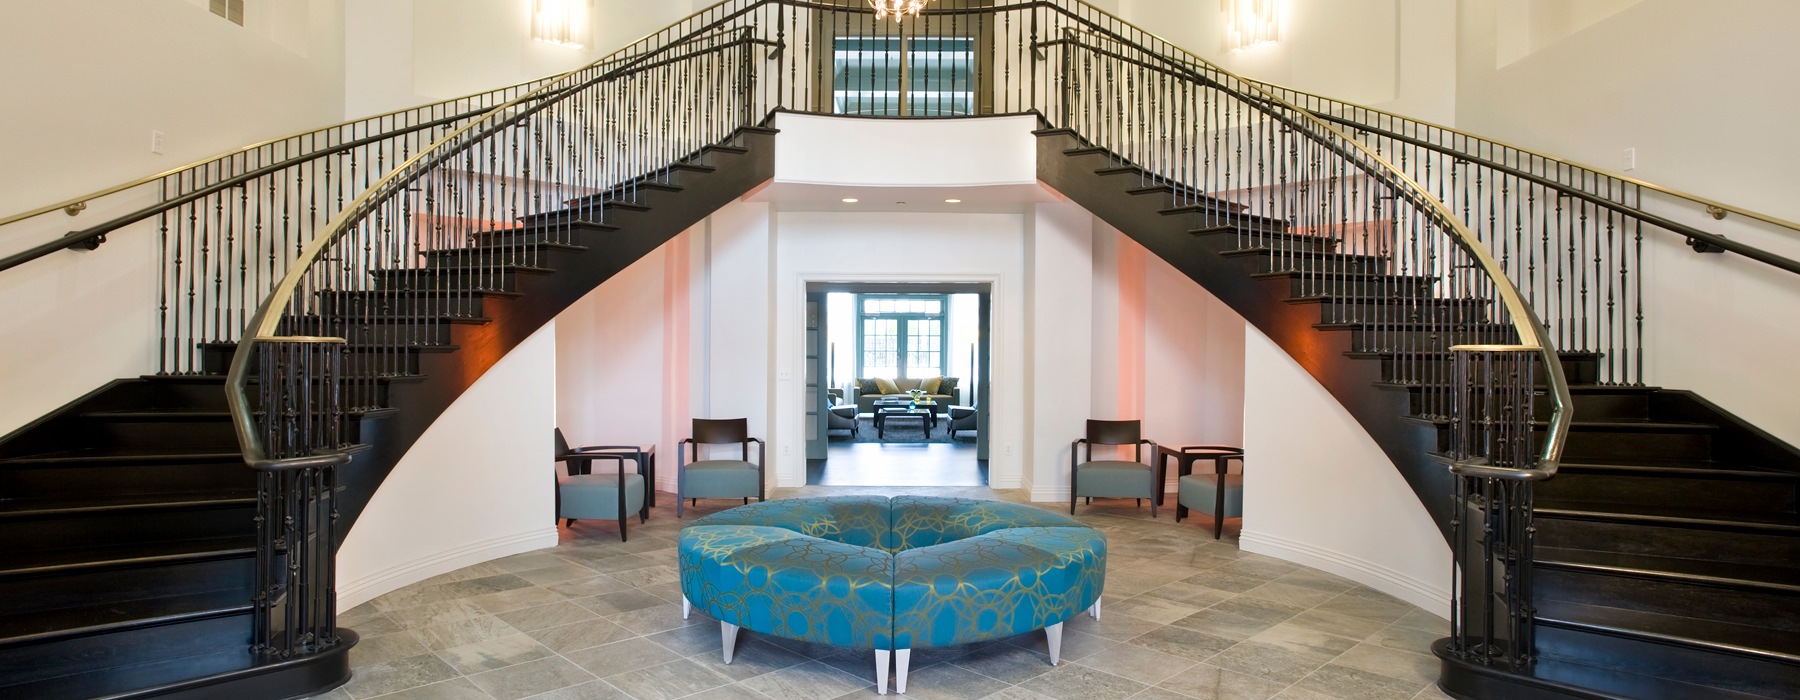 Large lobby with dual curving staircase and circular couch seating.